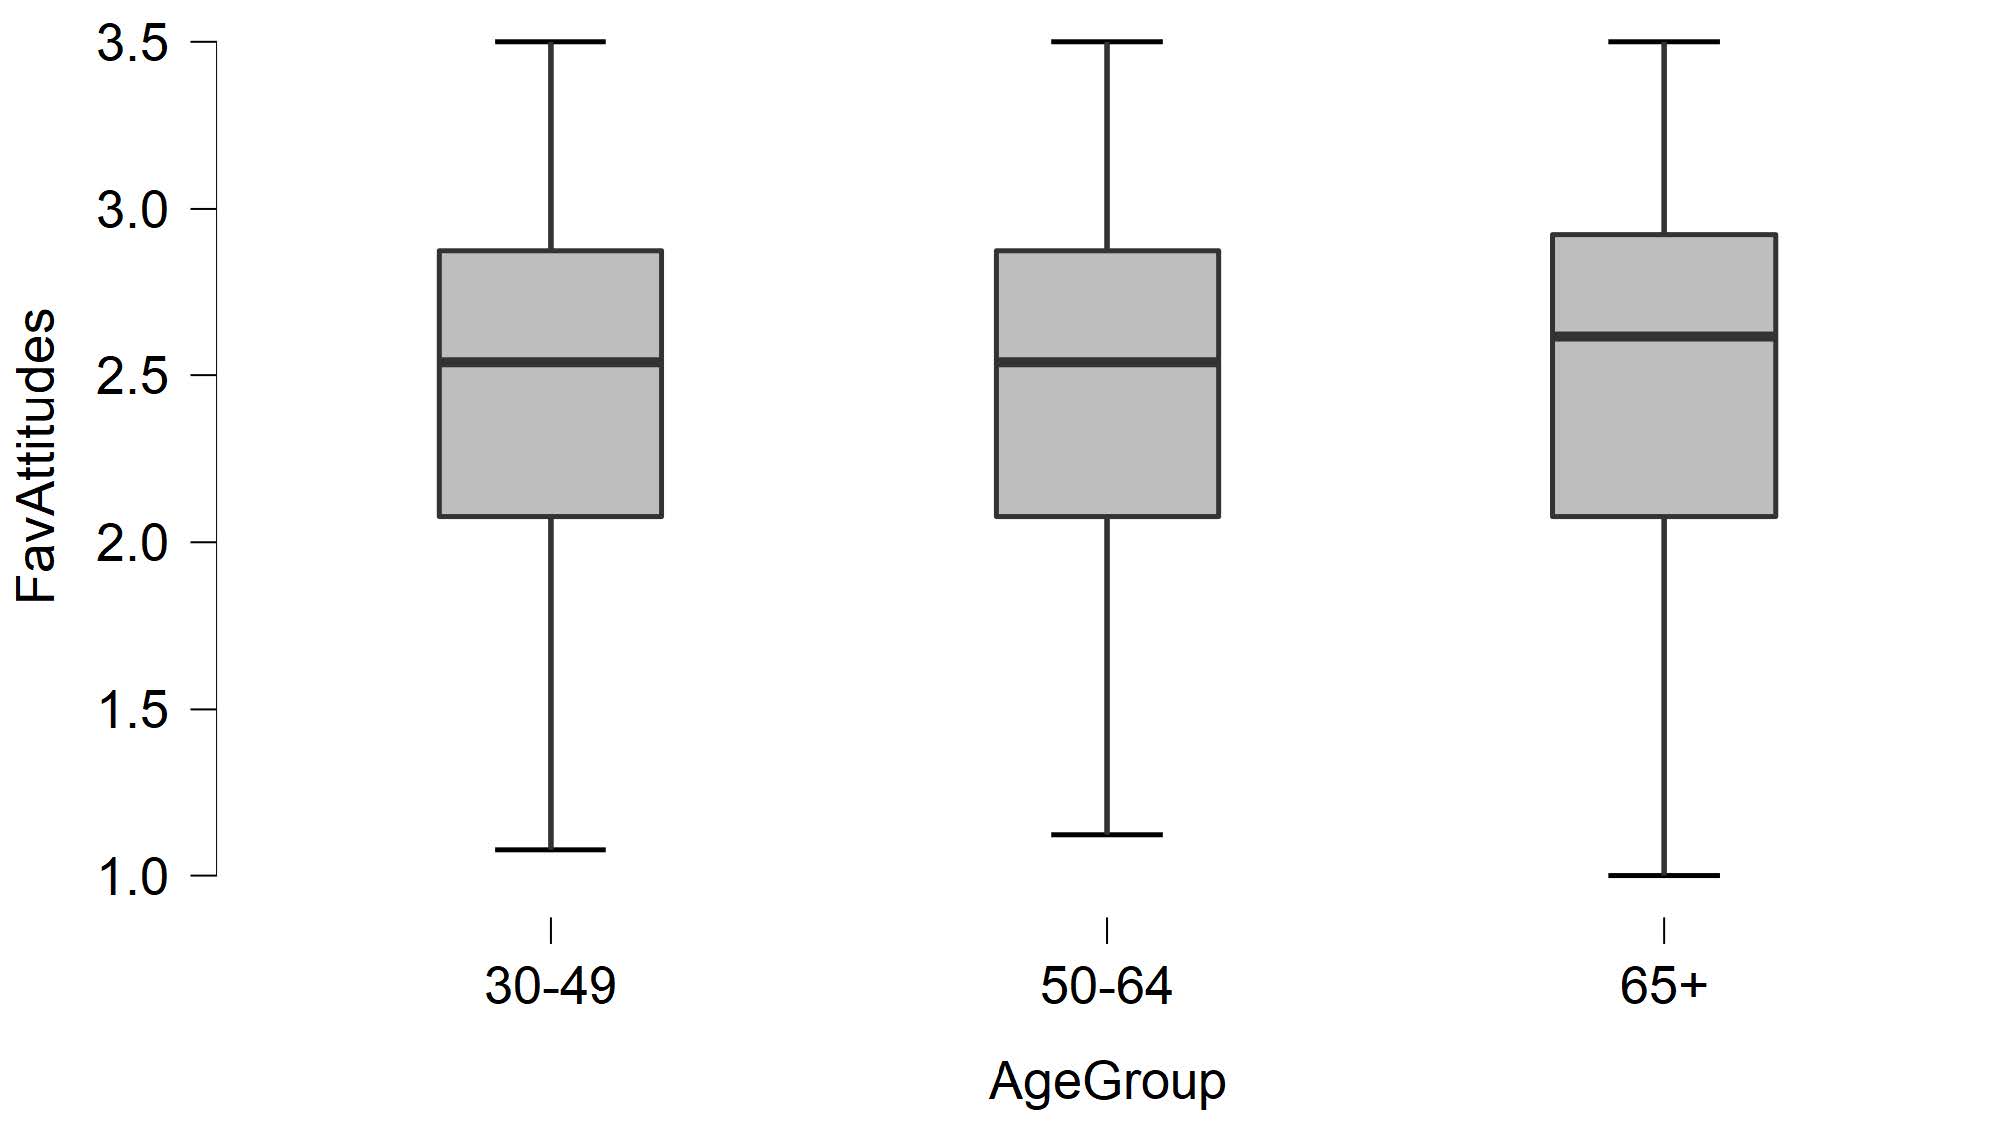 Boxplot image from JASP output with no outliers highlighted in the distribution of favorable attitudes toward women in politics for participants across all three age groups for men.